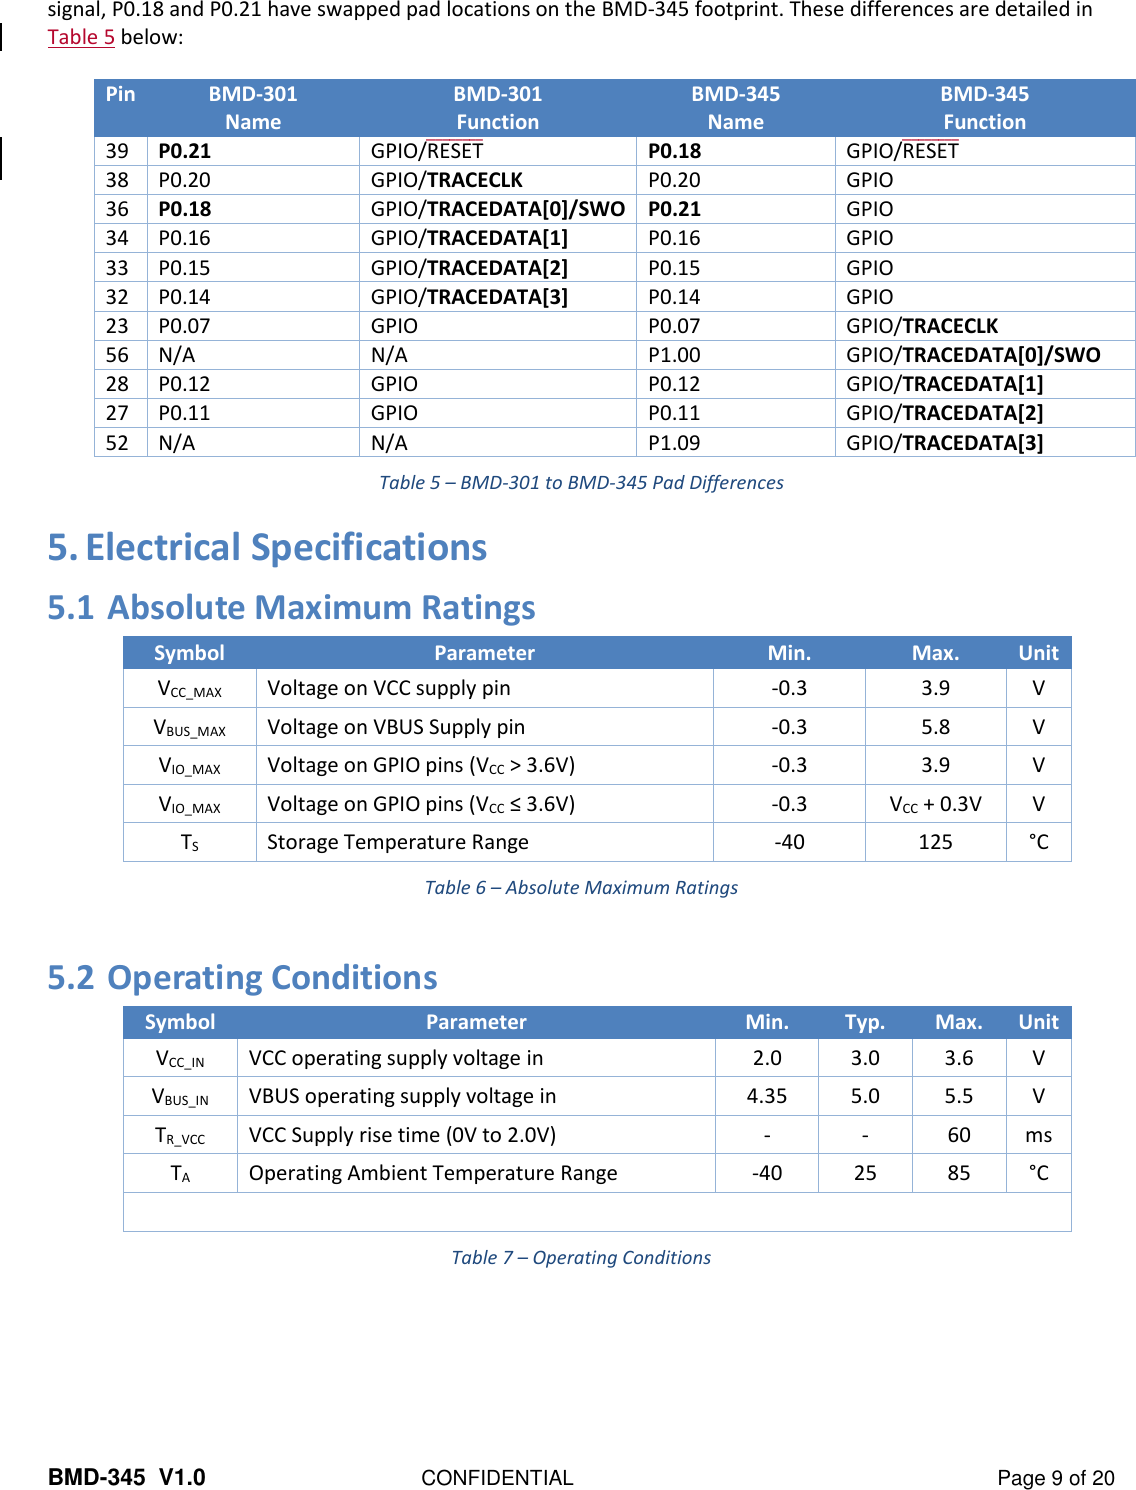 BMD-345  V1.0  CONFIDENTIAL  Page 9 of 20 signal, P0.18 and P0.21 have swapped pad locations on the BMD-345 footprint. These differences are detailed in Table 5 below:   Pin BMD-301 Name BMD-301 Function BMD-345 Name BMD-345 Function 39 P0.21 GPIO/RESET̅̅̅̅̅̅̅̅ P0.18 GPIO/RESET̅̅̅̅̅̅̅̅ 38 P0.20 GPIO/TRACECLK P0.20 GPIO 36 P0.18 GPIO/TRACEDATA[0]/SWO P0.21 GPIO 34 P0.16 GPIO/TRACEDATA[1] P0.16 GPIO 33 P0.15 GPIO/TRACEDATA[2] P0.15 GPIO 32 P0.14 GPIO/TRACEDATA[3] P0.14 GPIO 23 P0.07 GPIO P0.07 GPIO/TRACECLK 56 N/A N/A P1.00 GPIO/TRACEDATA[0]/SWO 28 P0.12 GPIO P0.12 GPIO/TRACEDATA[1] 27 P0.11 GPIO P0.11 GPIO/TRACEDATA[2] 52 N/A N/A P1.09 GPIO/TRACEDATA[3] Table 5 – BMD-301 to BMD-345 Pad Differences 5. Electrical Specifications 5.1 Absolute Maximum Ratings Symbol Parameter Min. Max. Unit VCC_MAX Voltage on VCC supply pin -0.3 3.9 V VBUS_MAX Voltage on VBUS Supply pin -0.3 5.8 V VIO_MAX Voltage on GPIO pins (VCC &gt; 3.6V) -0.3 3.9 V VIO_MAX Voltage on GPIO pins (VCC ≤ 3.6V) -0.3 VCC + 0.3V V TS Storage Temperature Range -40 125 °C Table 6 – Absolute Maximum Ratings  5.2 Operating Conditions Symbol Parameter Min. Typ. Max. Unit VCC_IN VCC operating supply voltage in 2.0 3.0 3.6 V VBUS_IN VBUS operating supply voltage in 4.35 5.0 5.5 V TR_VCC VCC Supply rise time (0V to 2.0V) - - 60 ms TA Operating Ambient Temperature Range -40 25 85 °C  Table 7 – Operating Conditions   